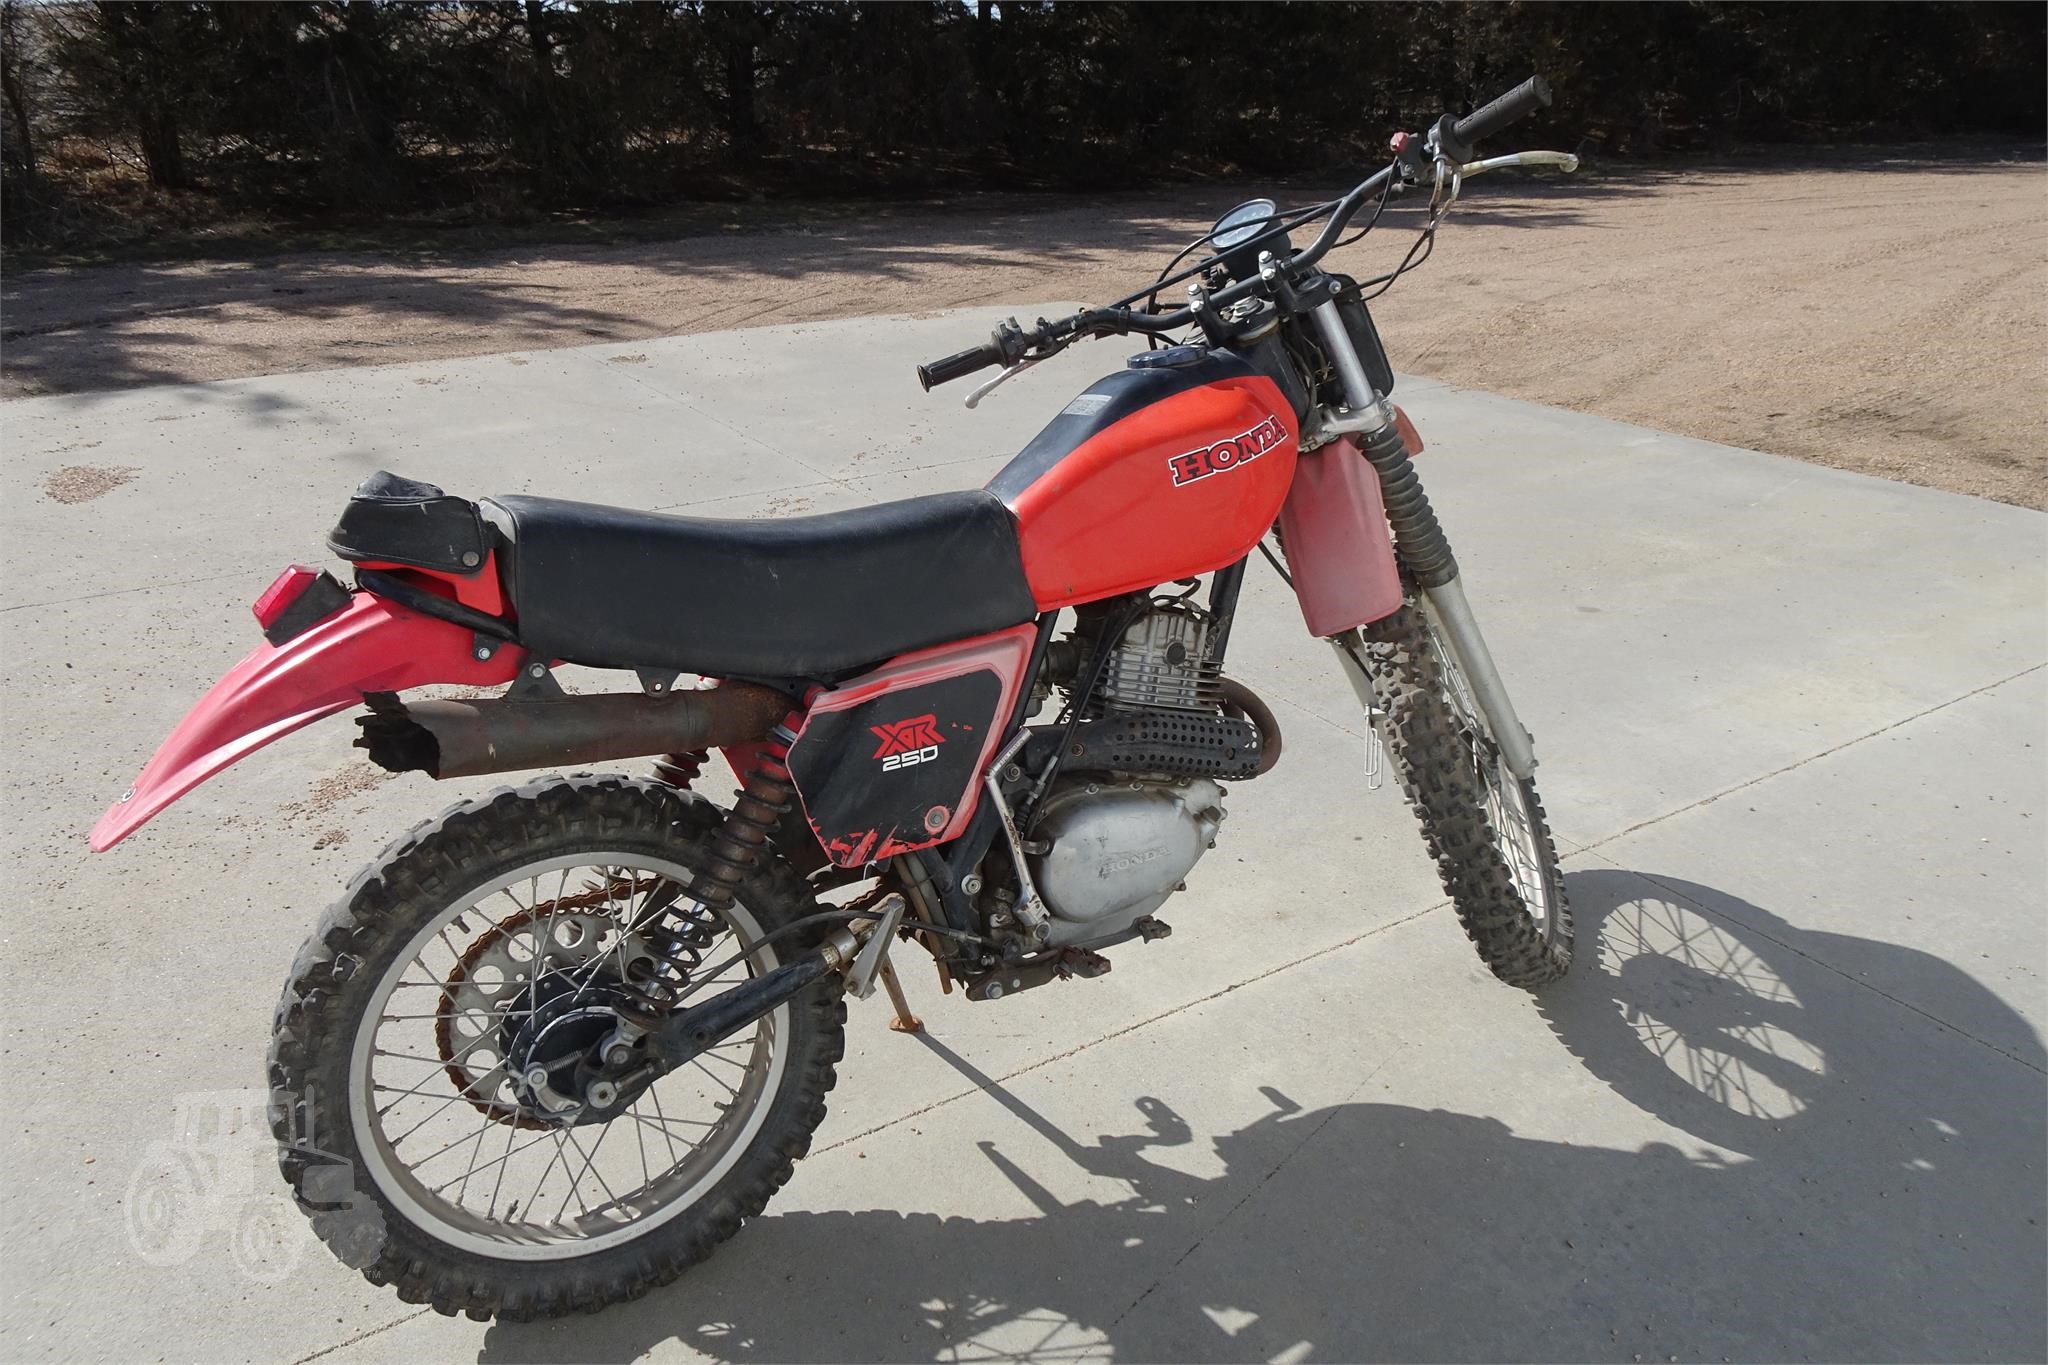 Honda Xr250r Auction Results 5 Listings Tractorhouse Com Page 1 Of 1